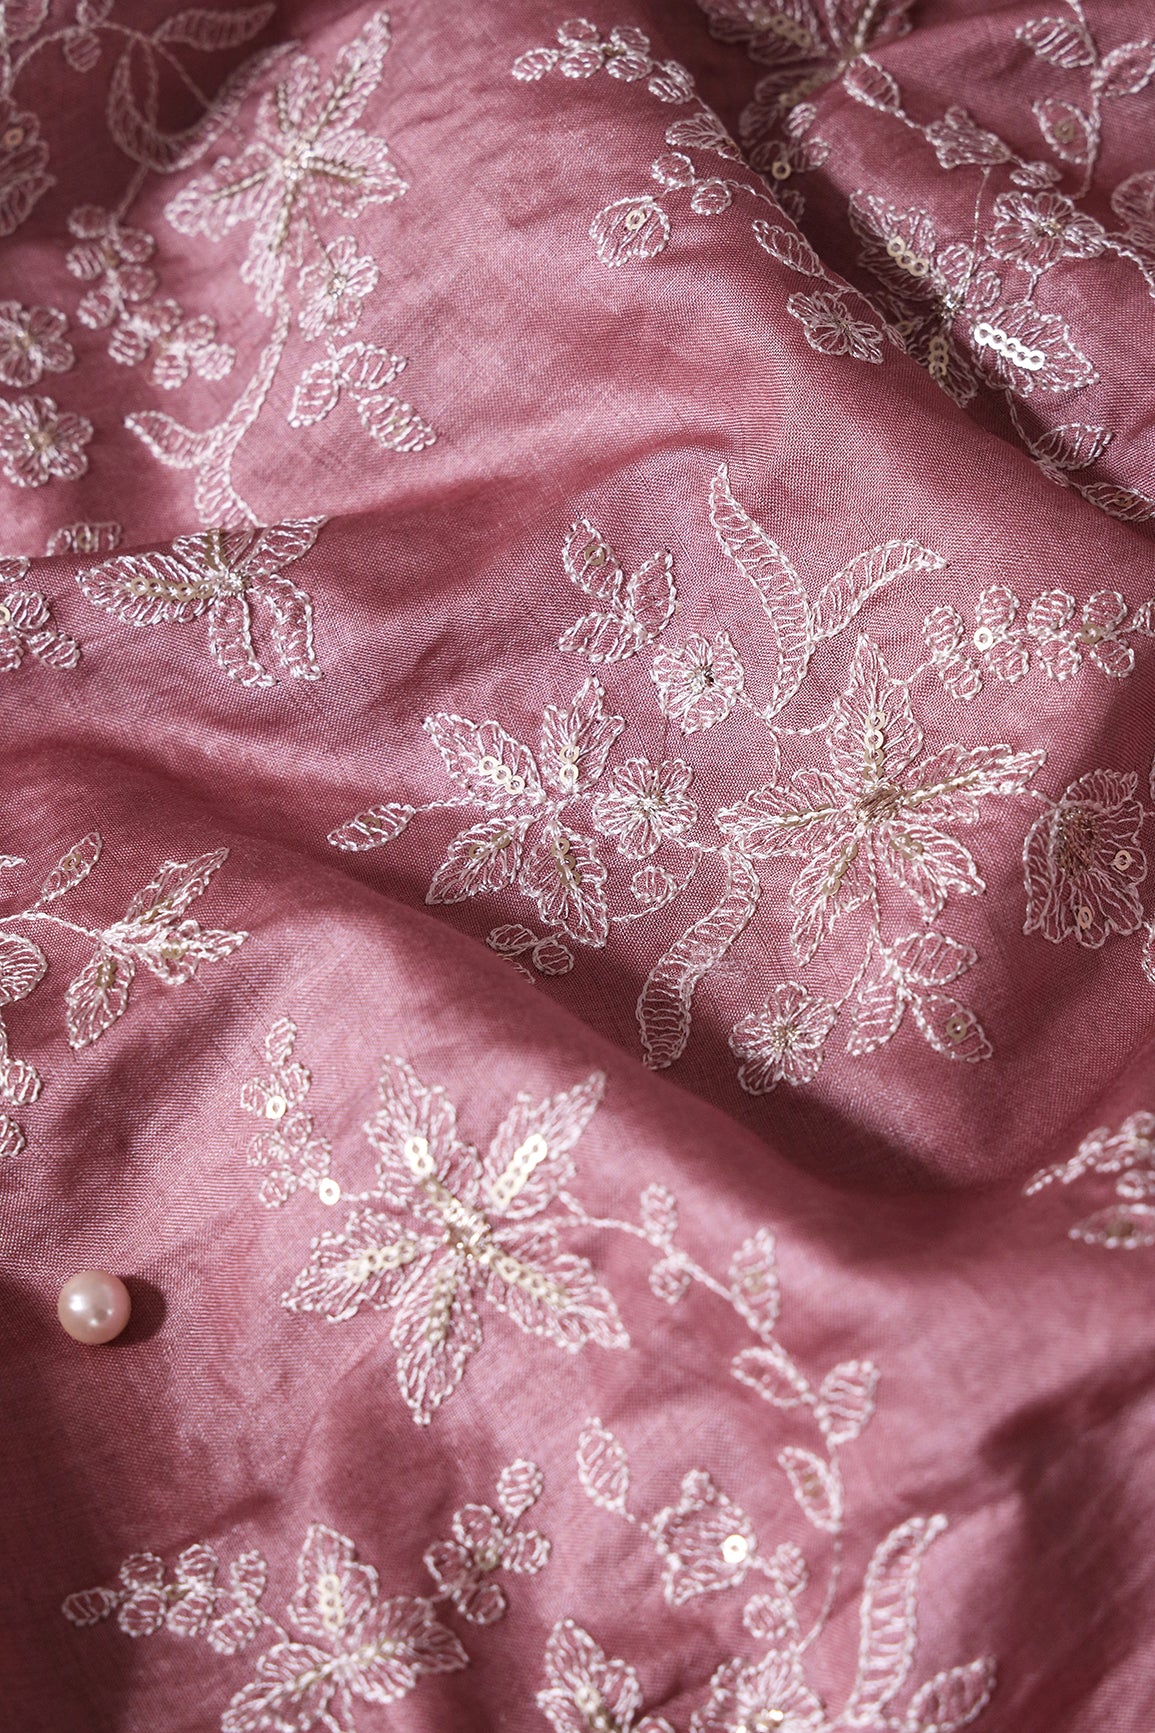 White Thread With Gold Sequins Floral Embroidery On Mauve Pure Bamboo Silk Fabric